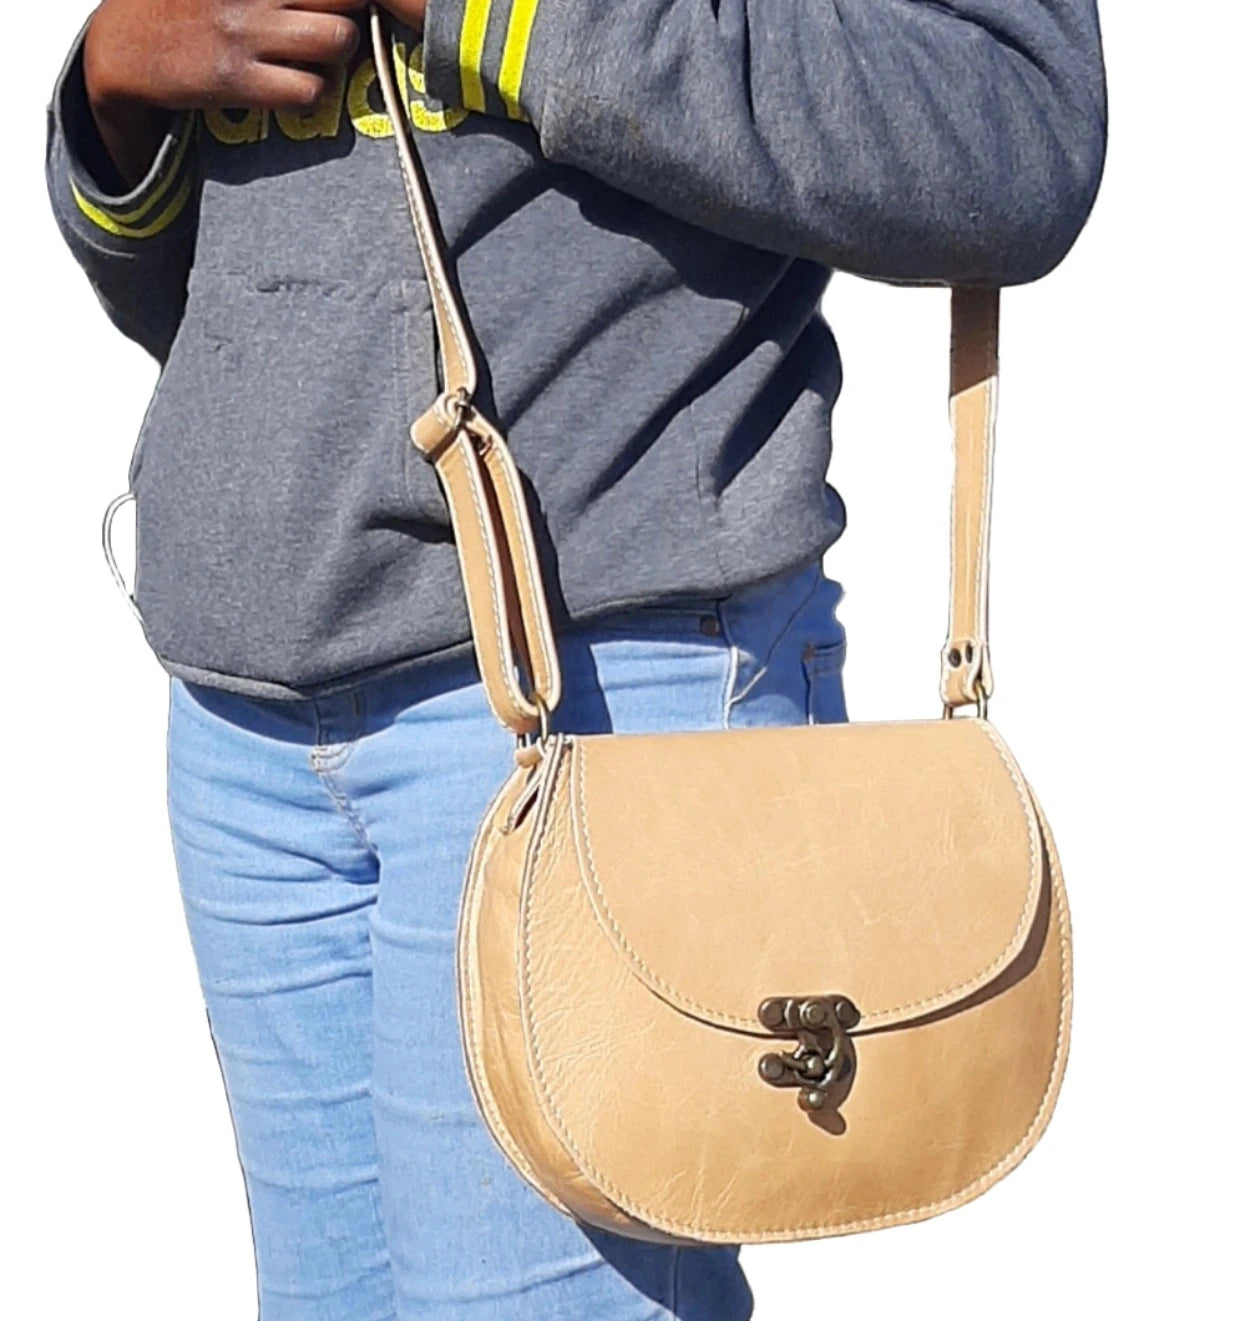 A beatiful  lady carrying a beautiful Crossbody "D Bag big leather bags / Mini Sandle bags" at Cape Masai leather in Cape Town  